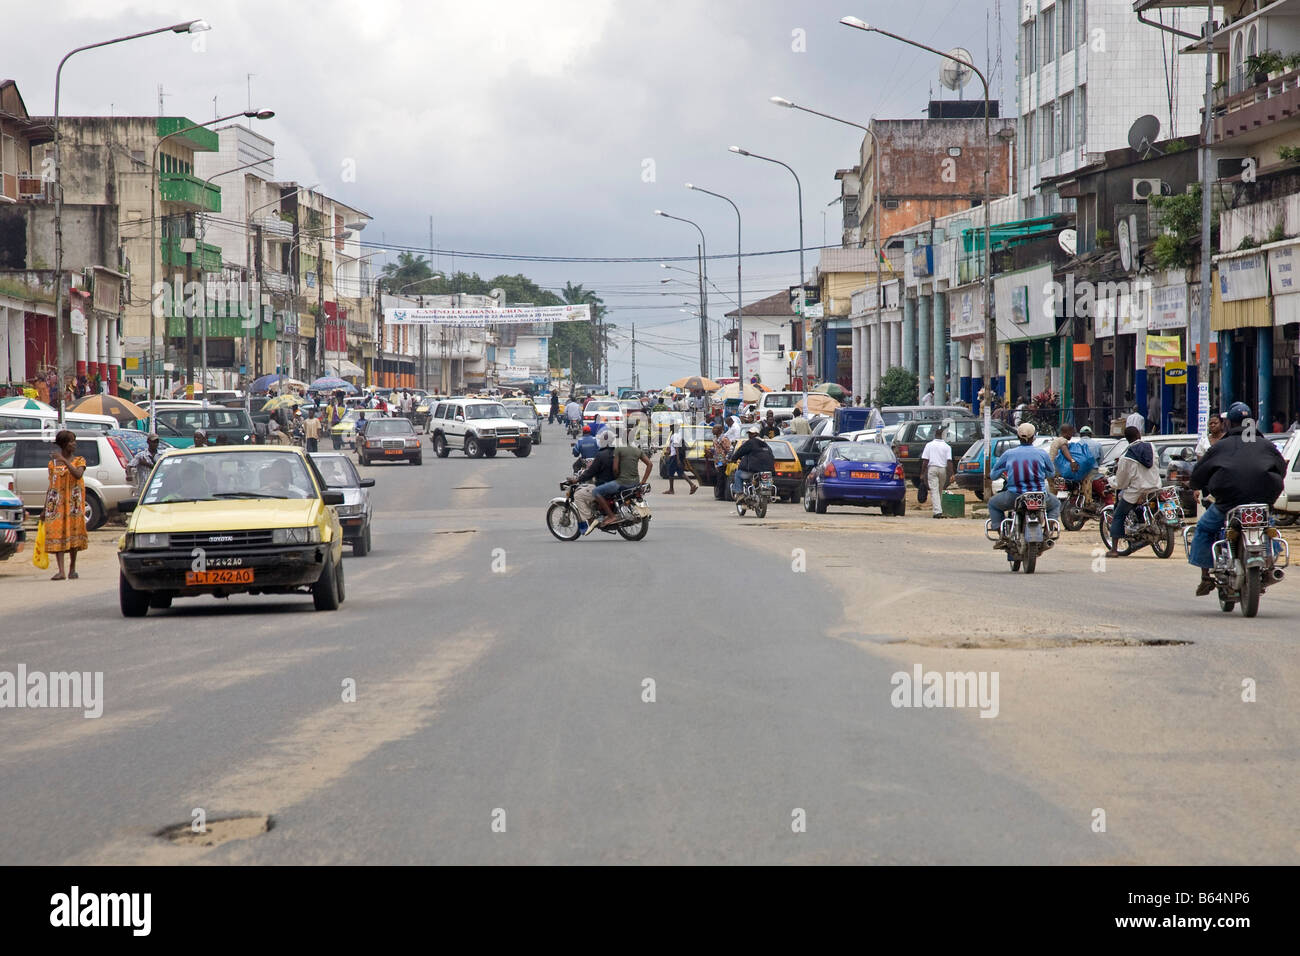 Traffic in city centre, Douala, Cameroon, Africa Stock Photo